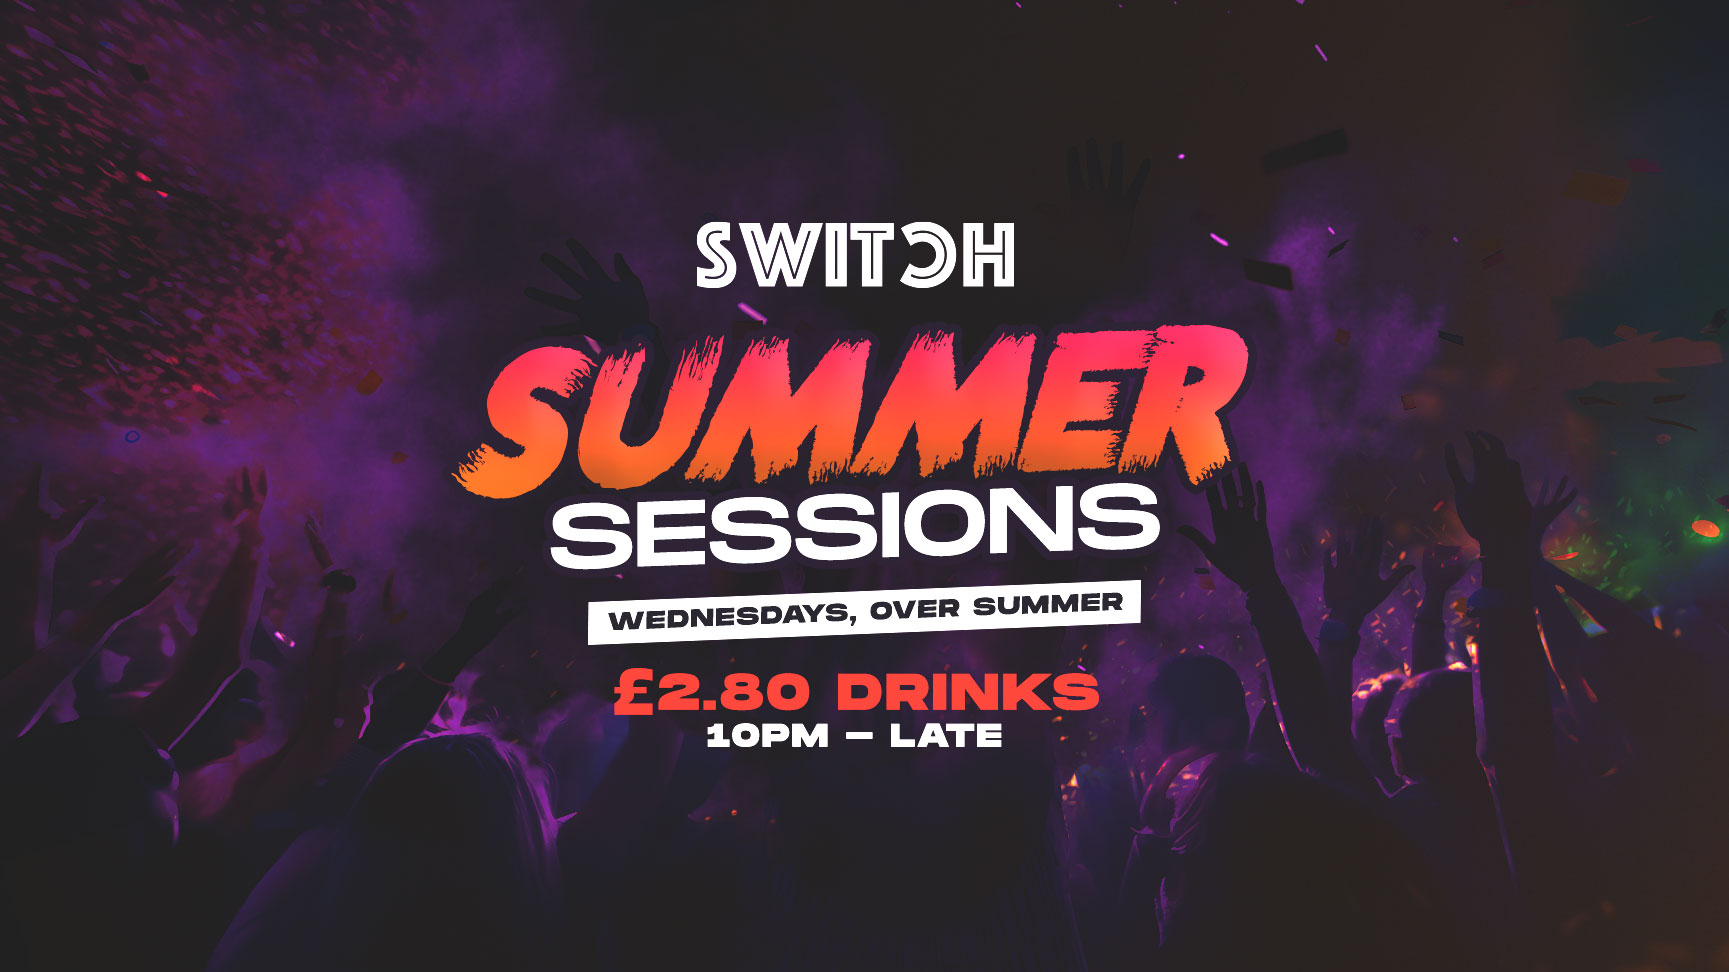 Summer Session’s | Every Wednesday over Summer | £2.80 Drinks